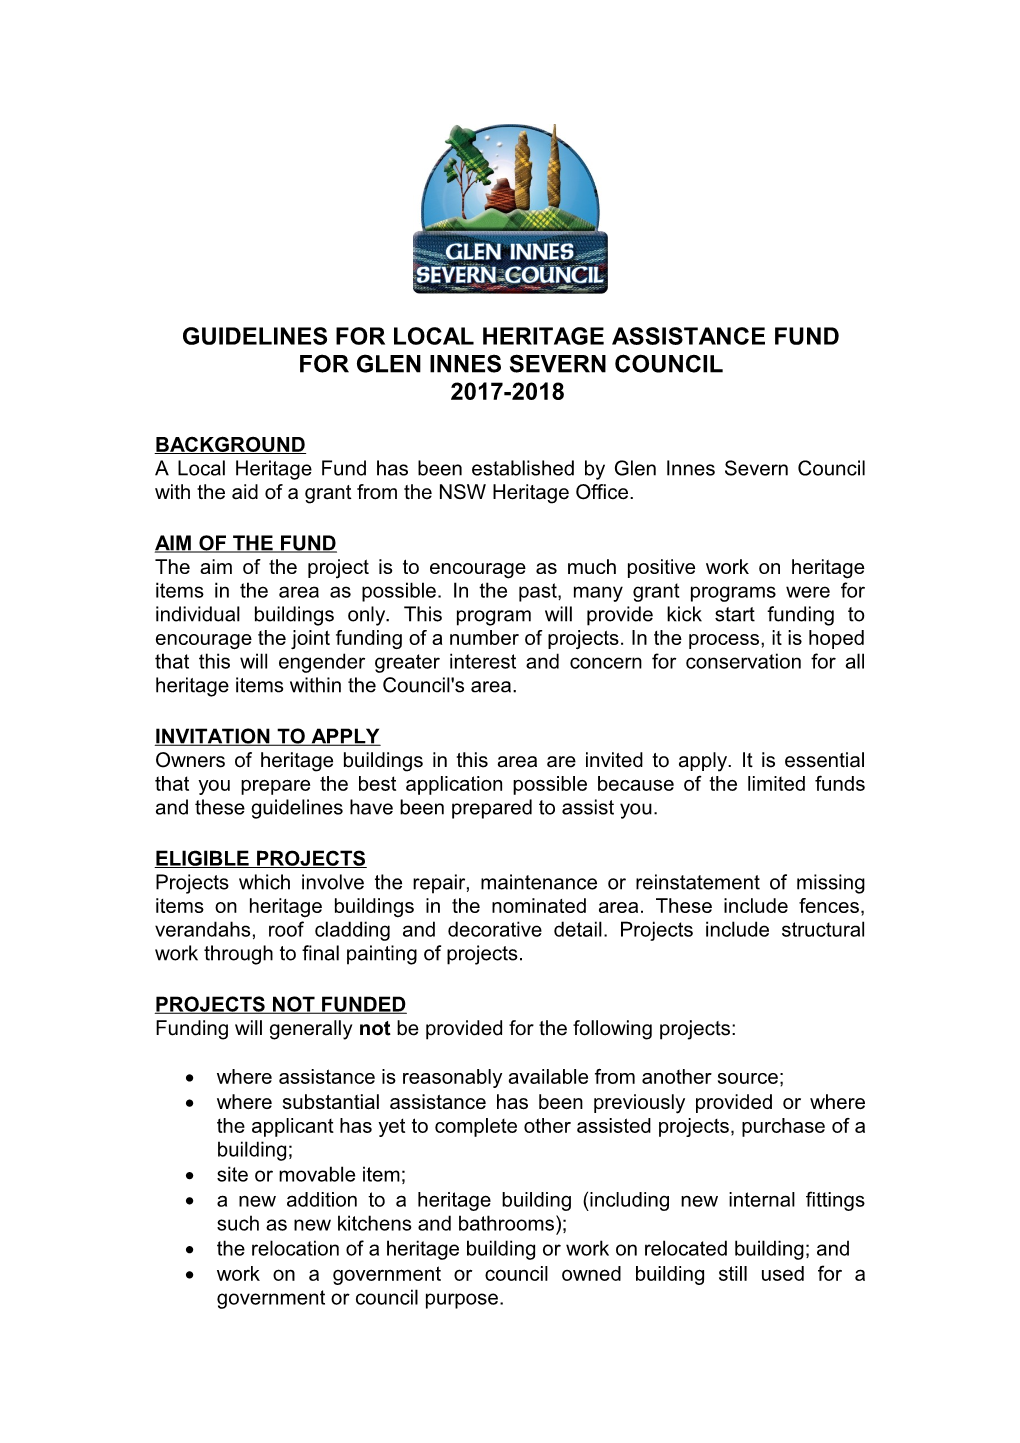 Guidelines for Local Heritage Assistance Fund for Glen Innes Severn Council